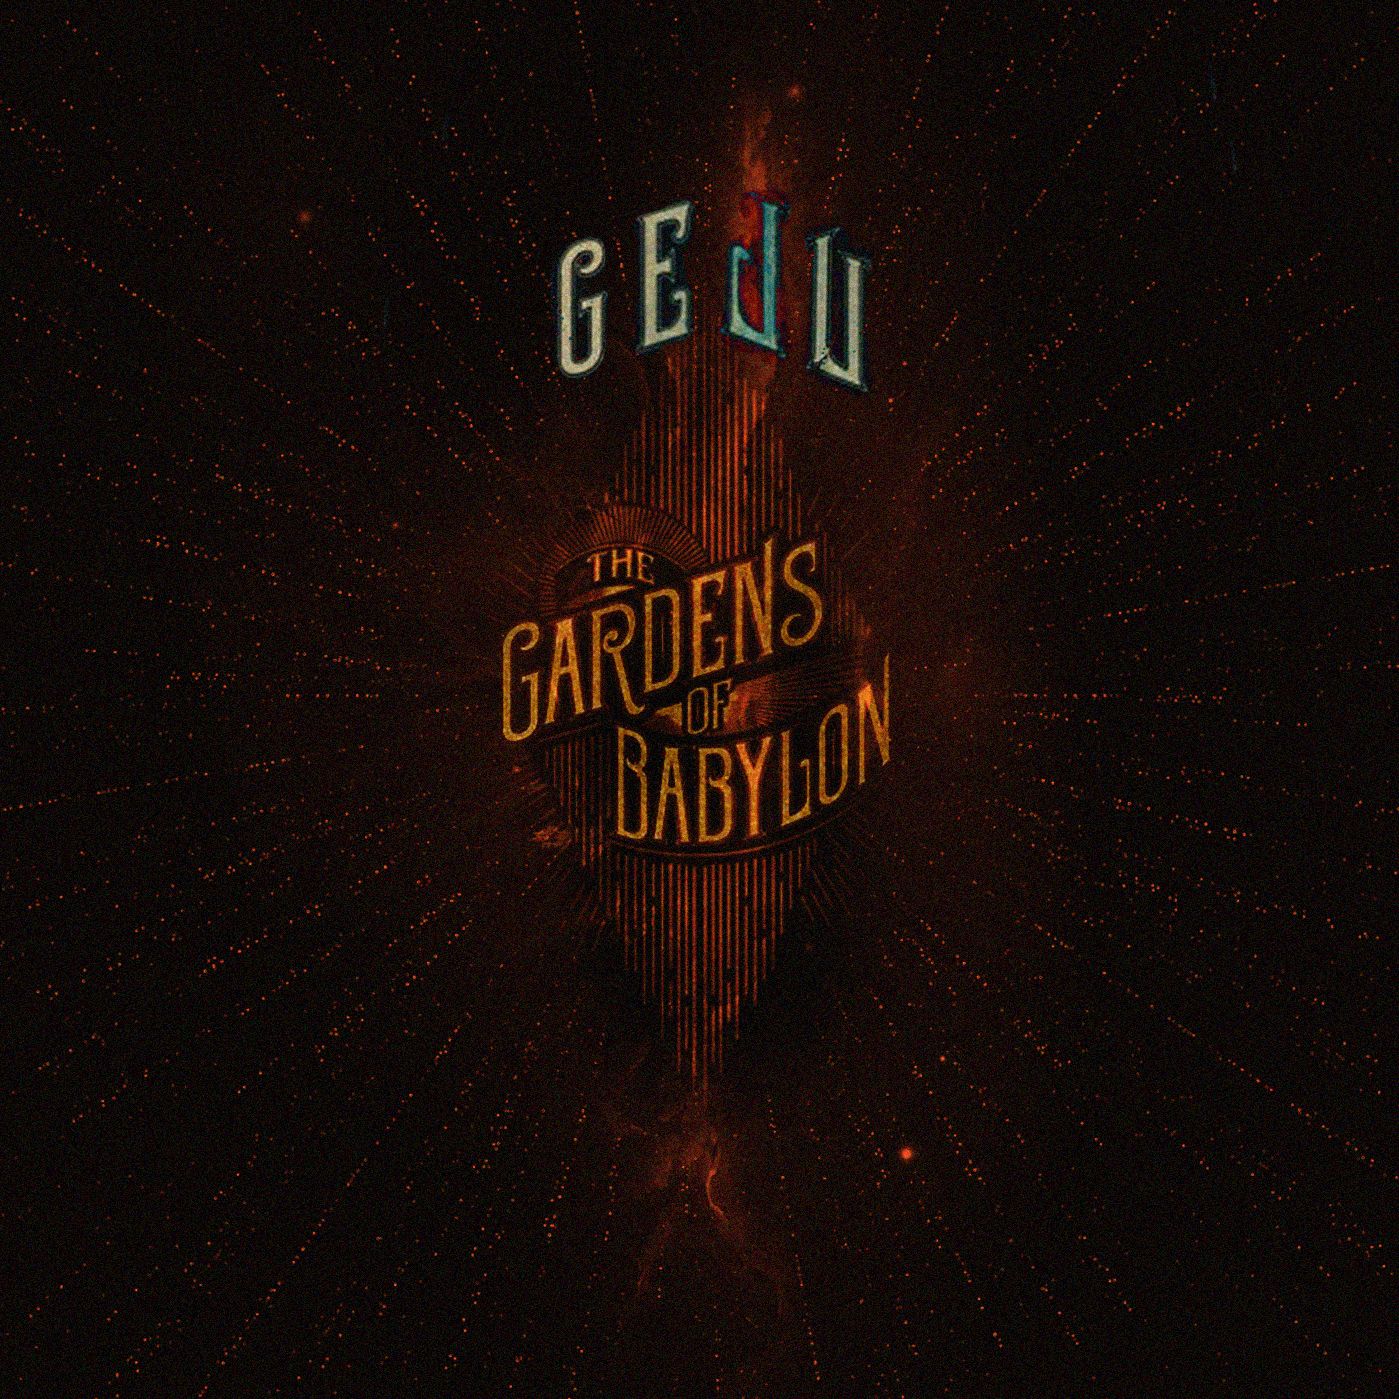 Download The Seekers of Light Babylon at ADE 2021 - Geju